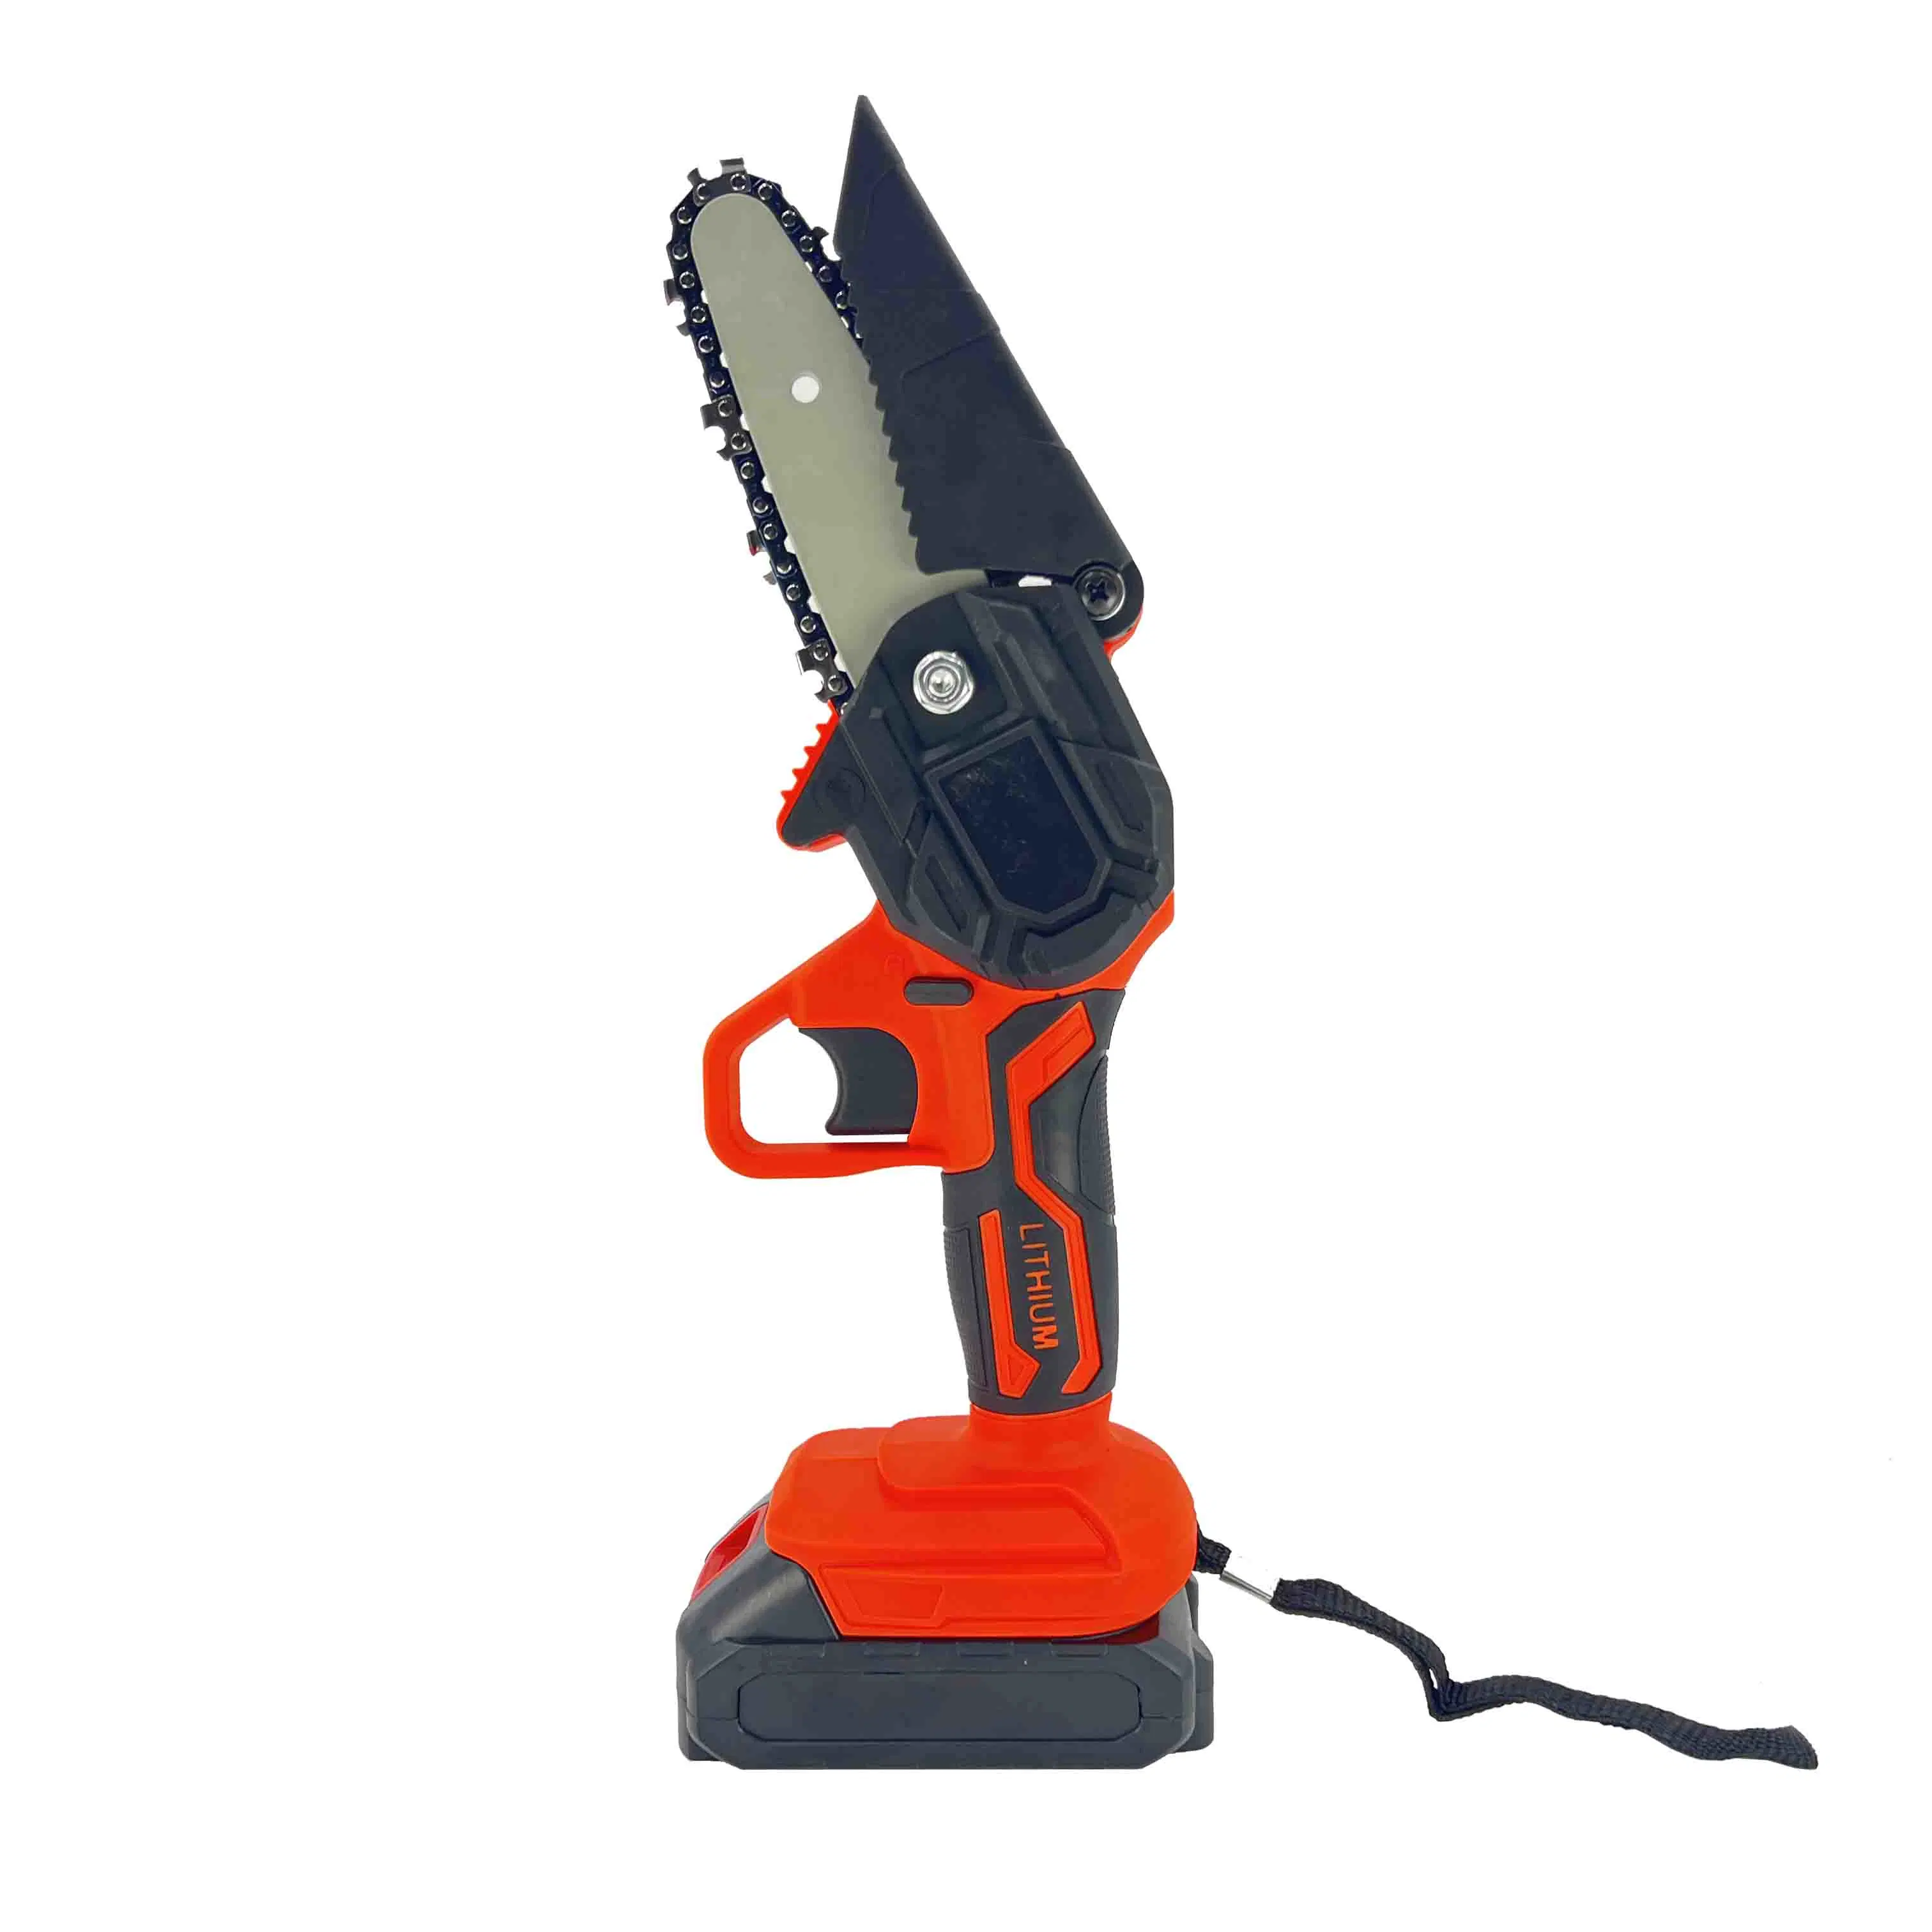 6 Inch Battery Powered, Handheld Portable Electric Chain Saws for Wood Cutting